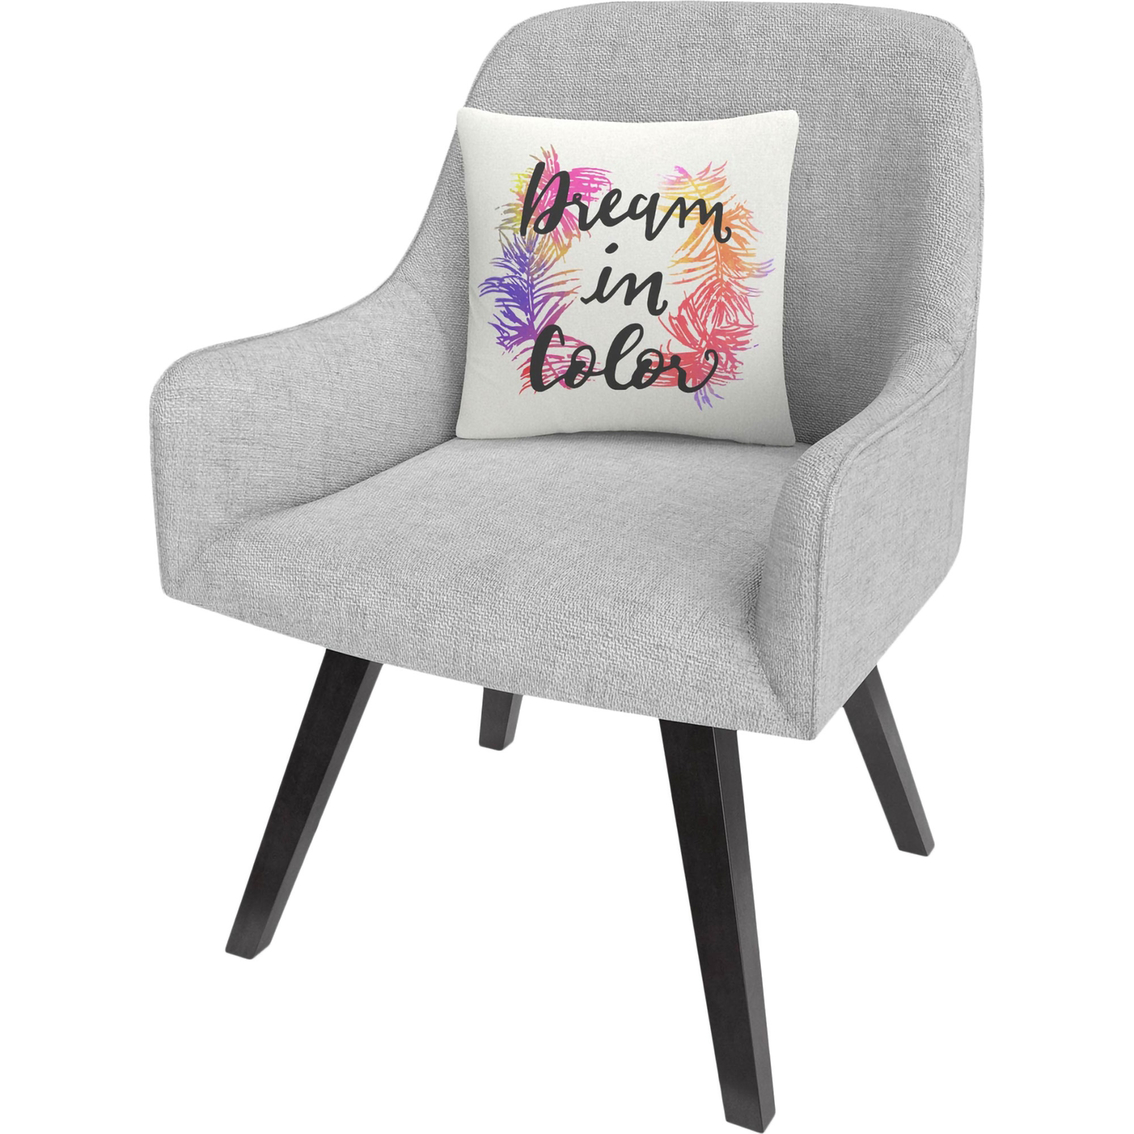 Trademark Fine Art Dream in Color Decorative Throw Pillow - Image 2 of 3